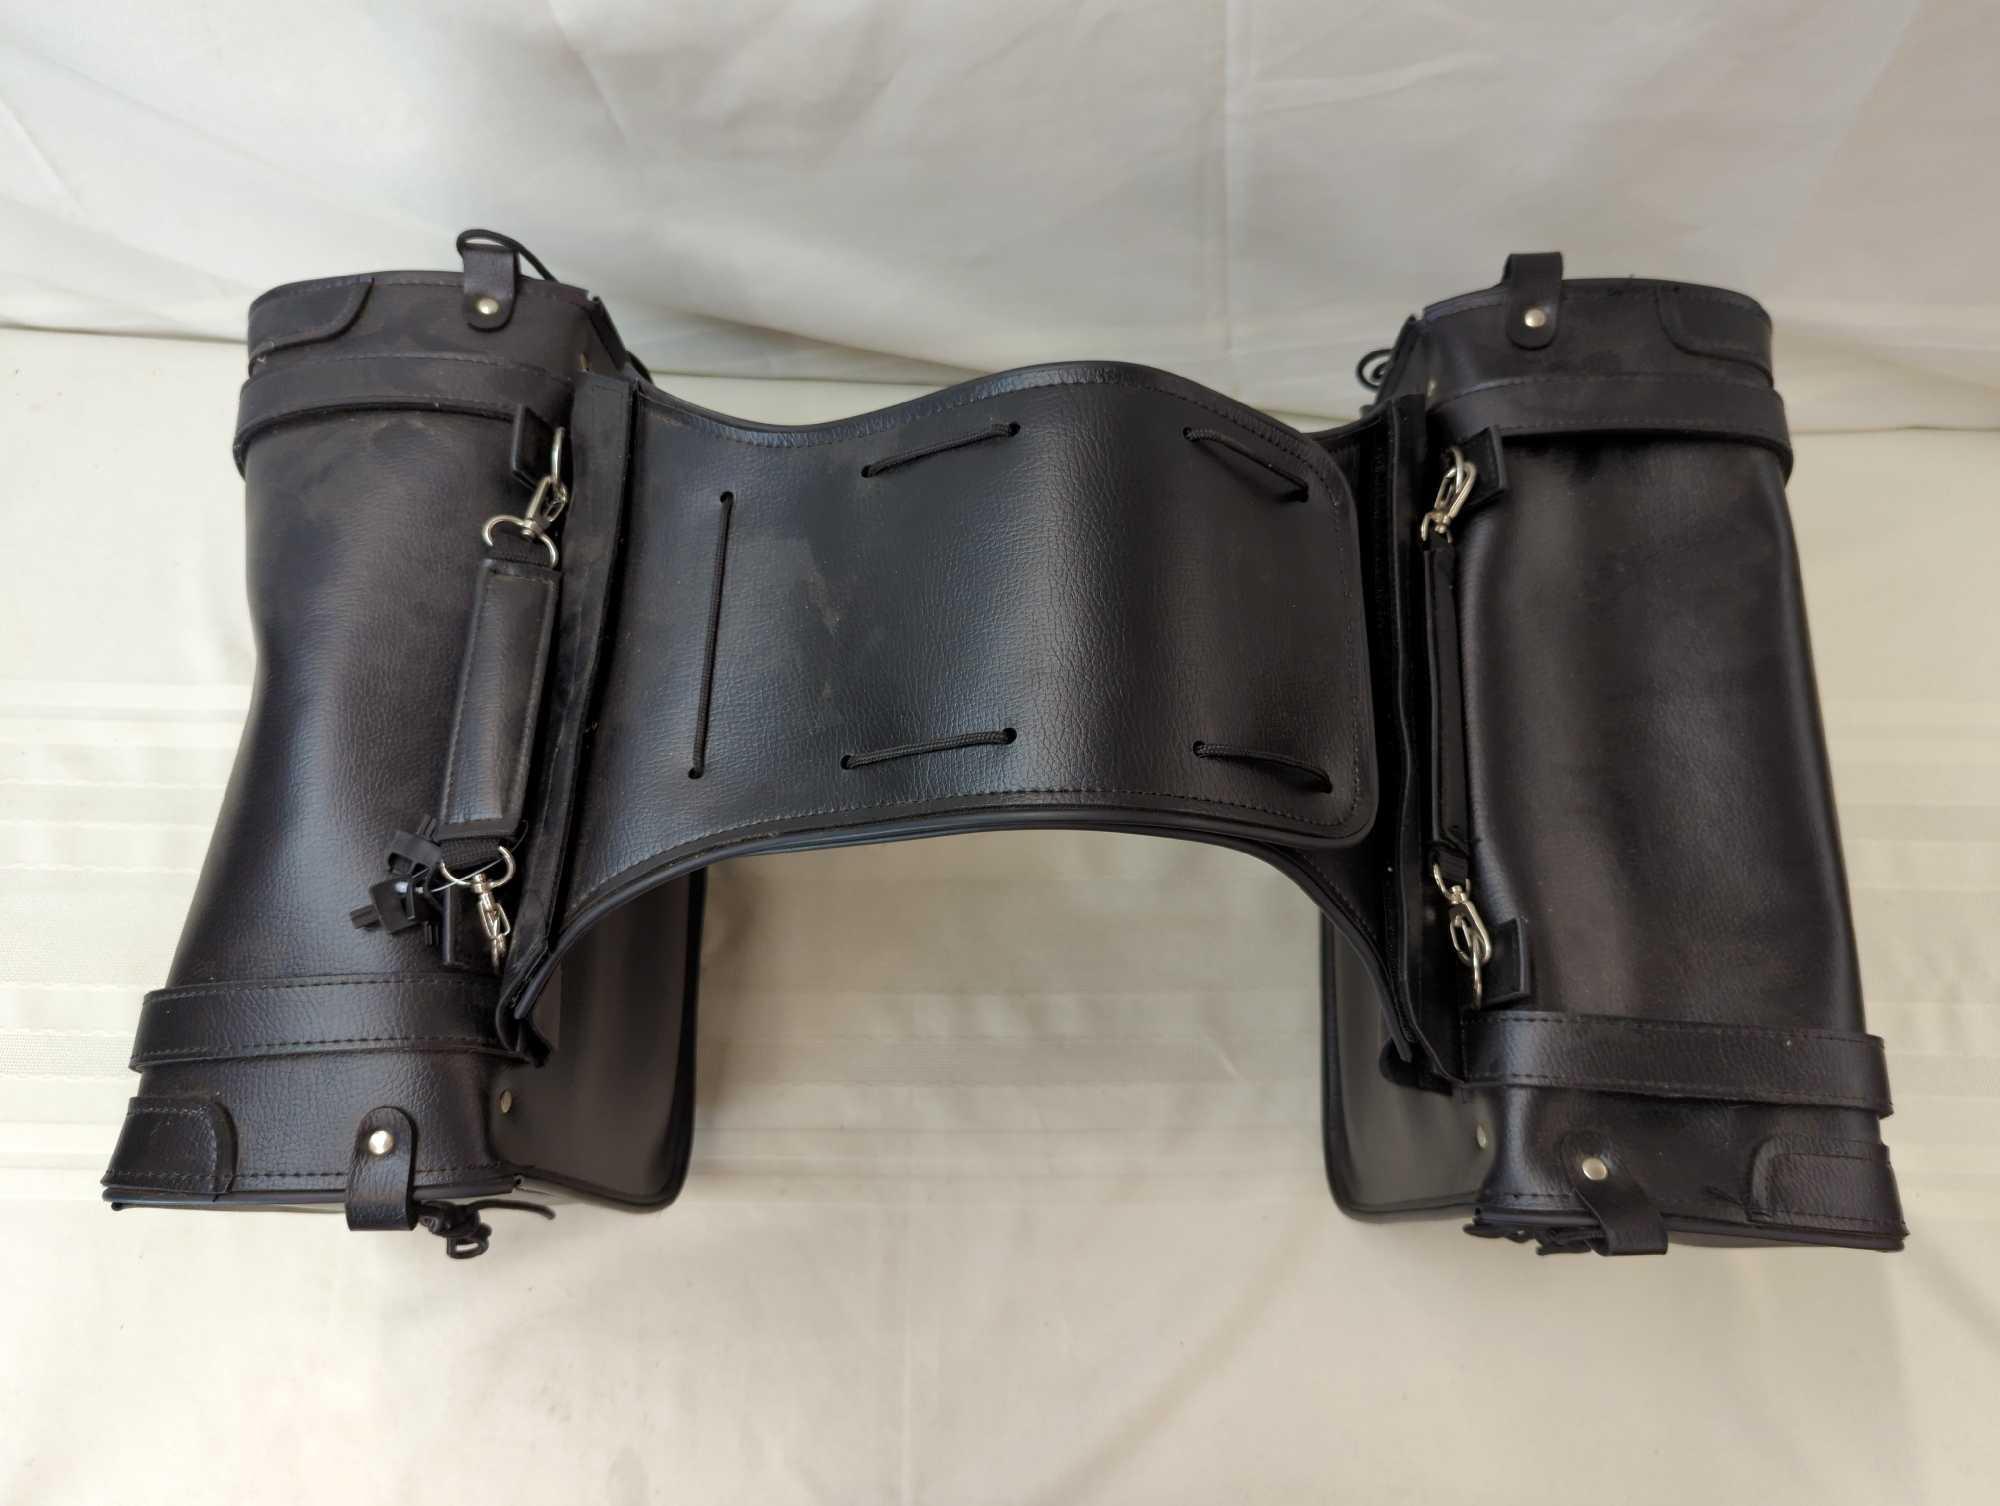 LEATHER MOTORCYCLE SADDLE BAGS 15"X11" EACH SIDE